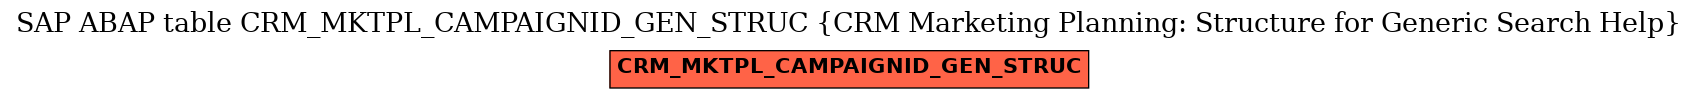 E-R Diagram for table CRM_MKTPL_CAMPAIGNID_GEN_STRUC (CRM Marketing Planning: Structure for Generic Search Help)